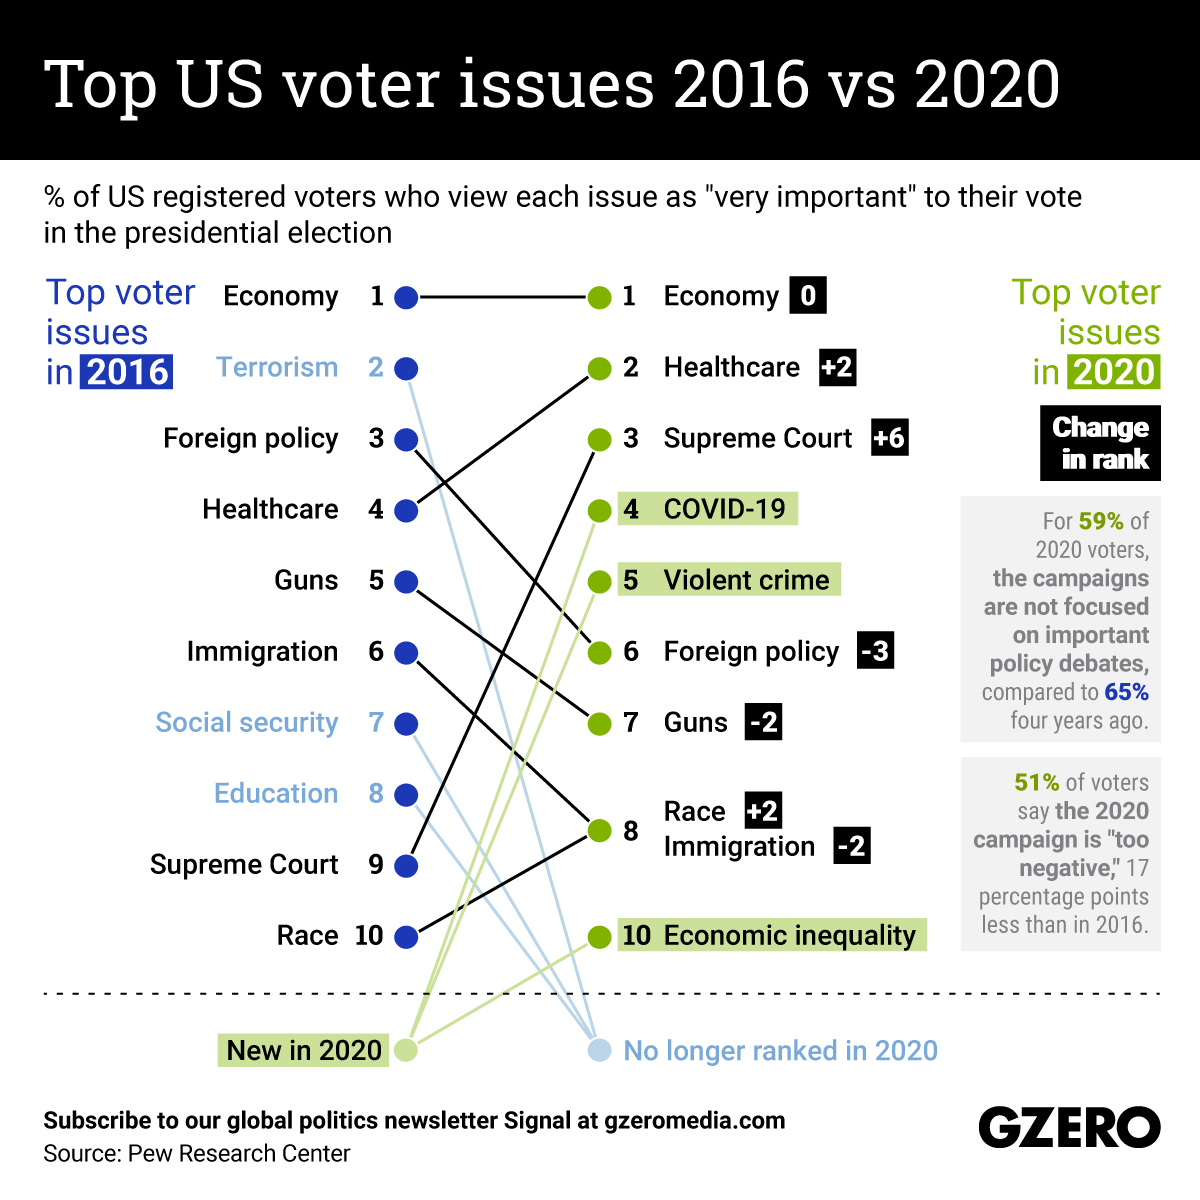 The Graphic Truth: Top US voter issues 2016 vs 2020